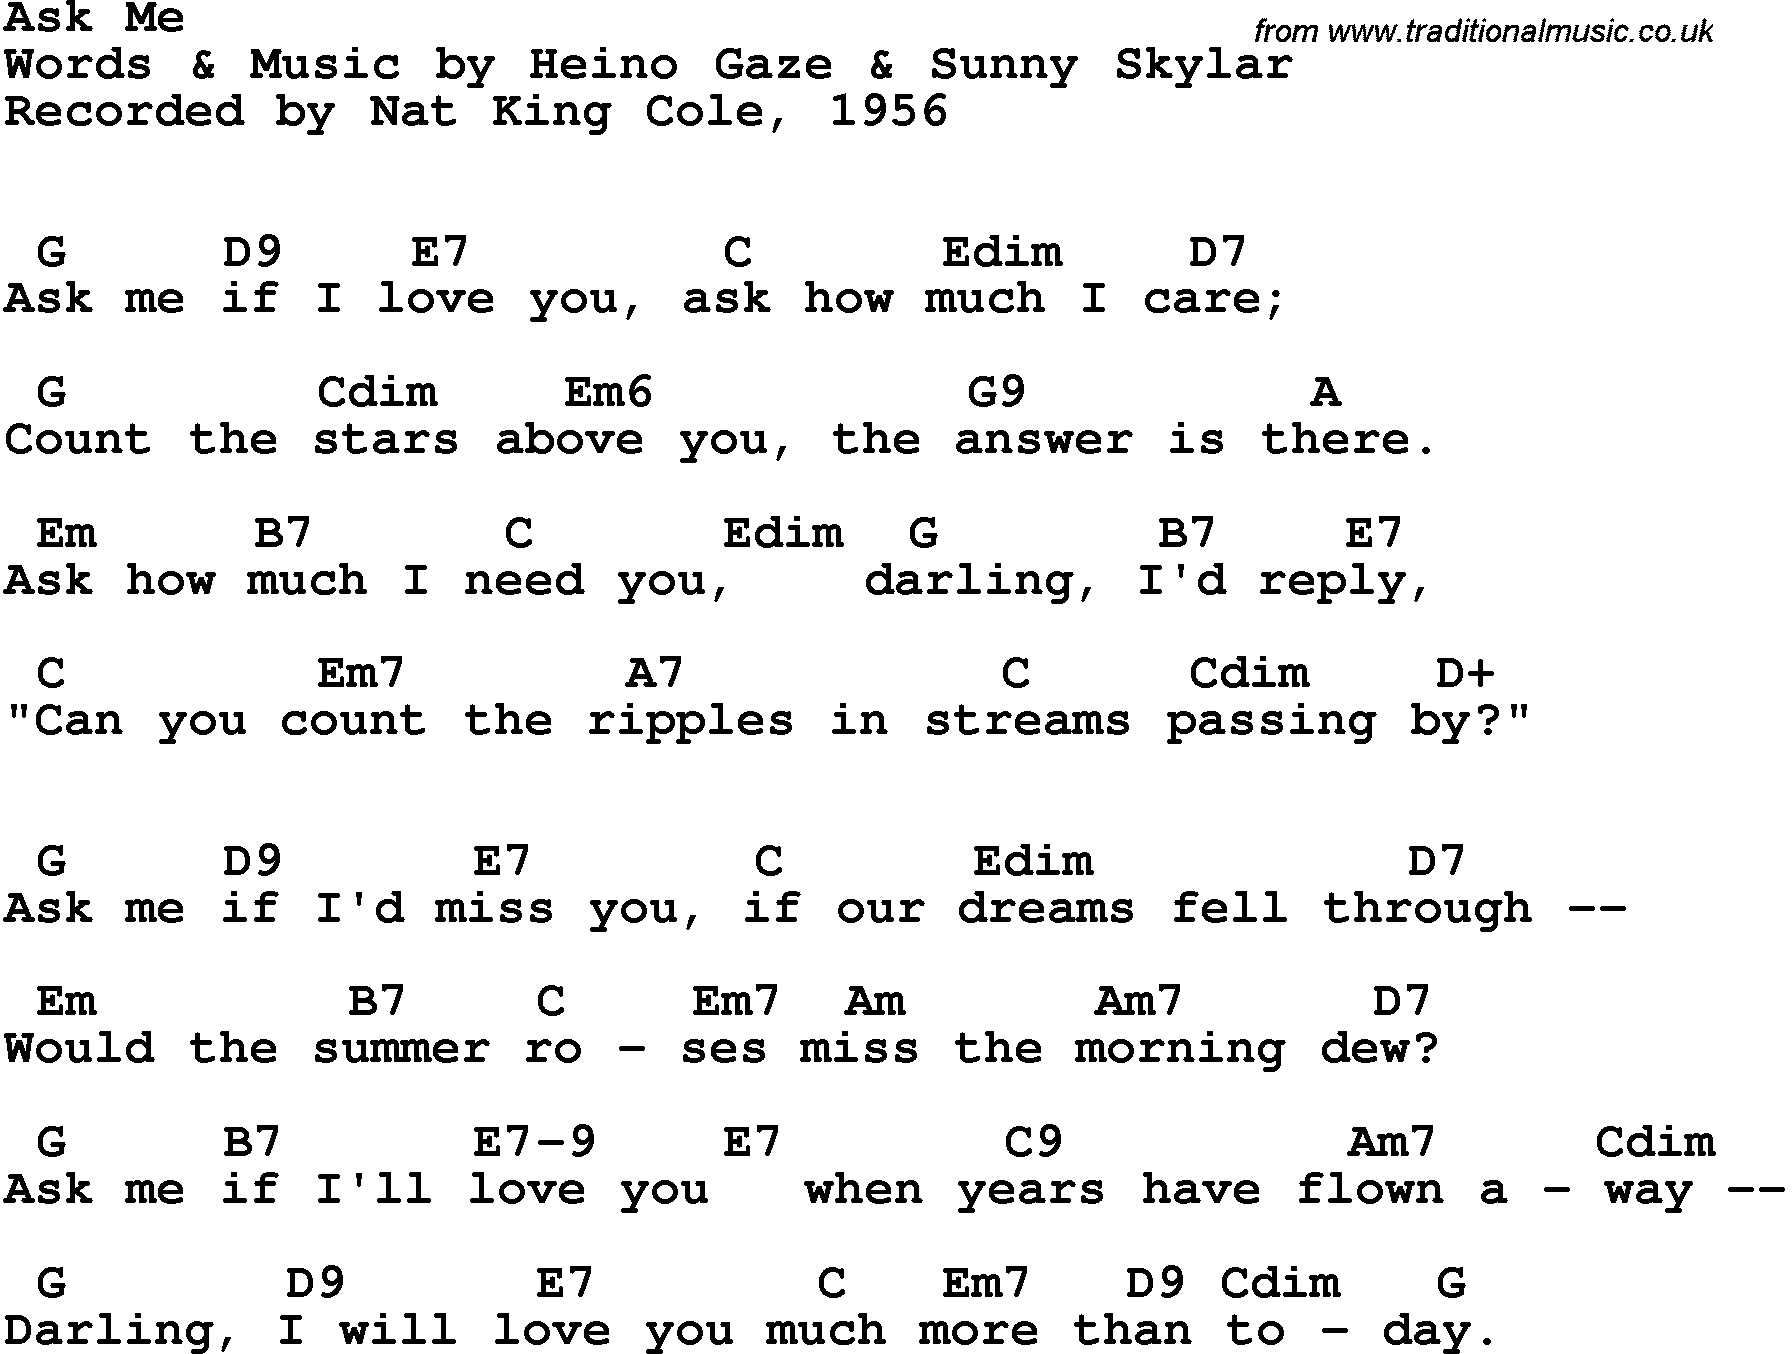 Song Lyrics with guitar chords for Ask Me - Nat King Cole, 1956